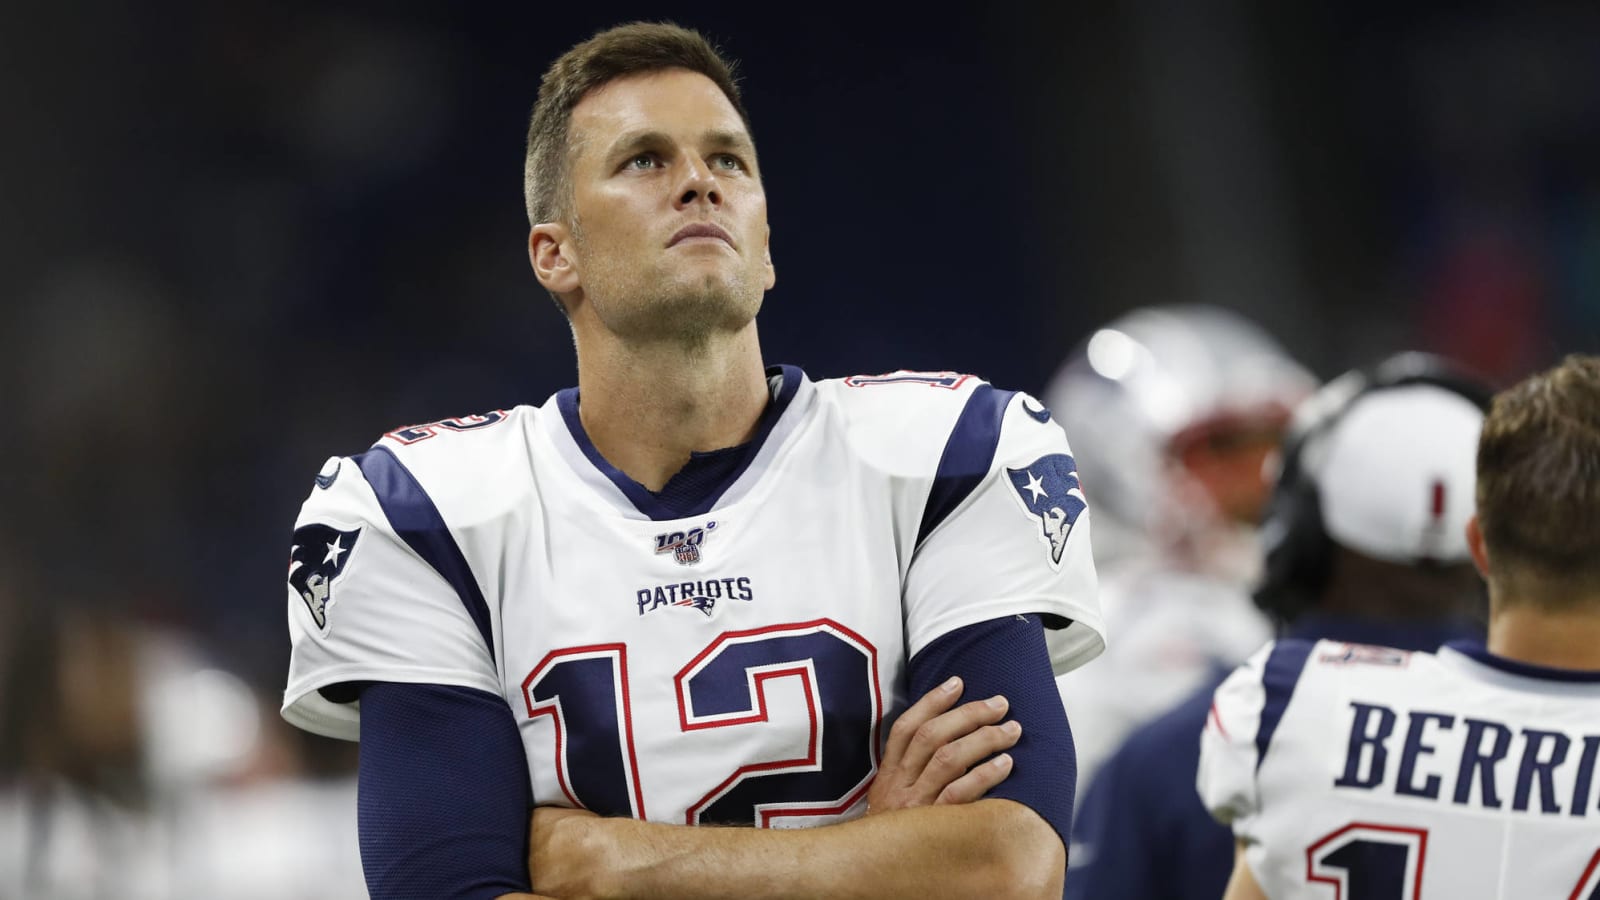 Tom Brady shares funny message about his fantasy football clout